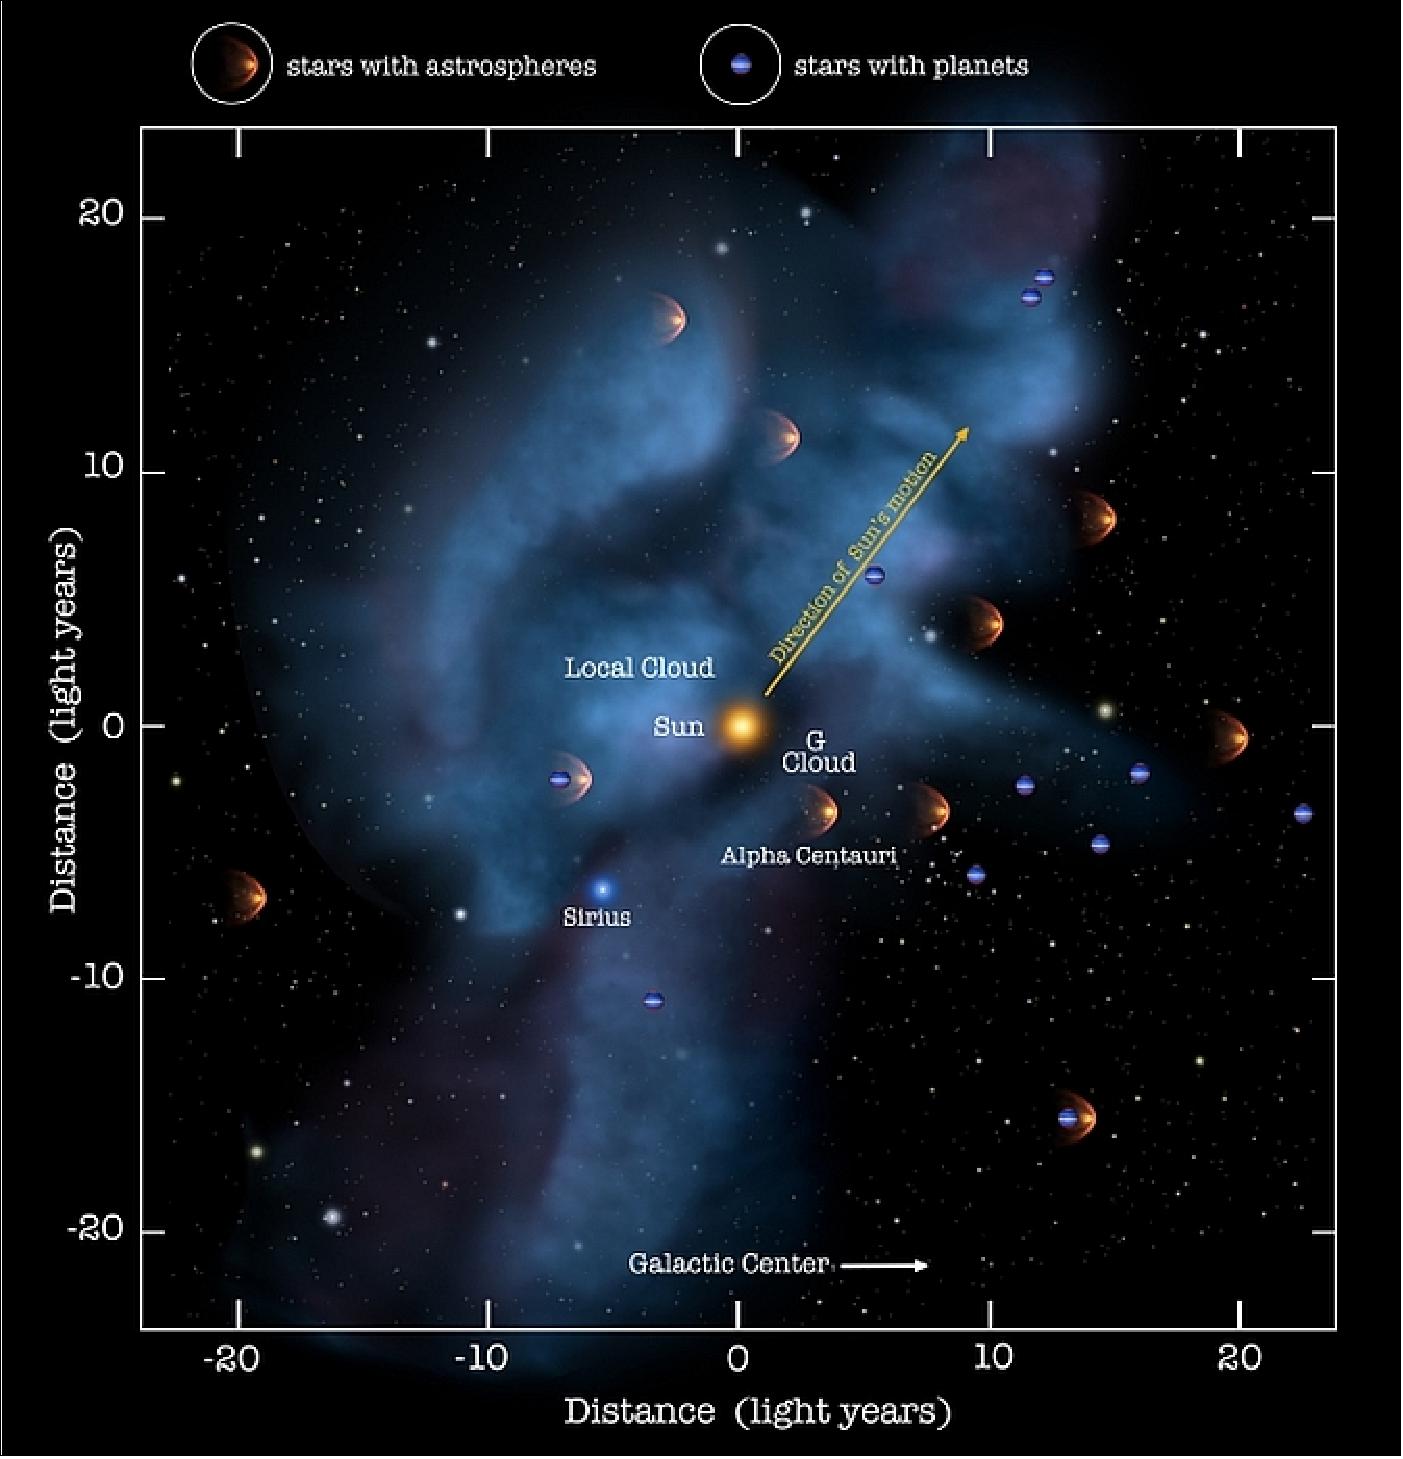 Figure 28: The solar system moves through a local galactic cloud at a speed of 23 km/s, creating an interstellar wind of particles, some of which can travel all the way toward Earth to provide information about our neighborhood (image credit: NASA/Adler, U. Chicago/Wesleyan)